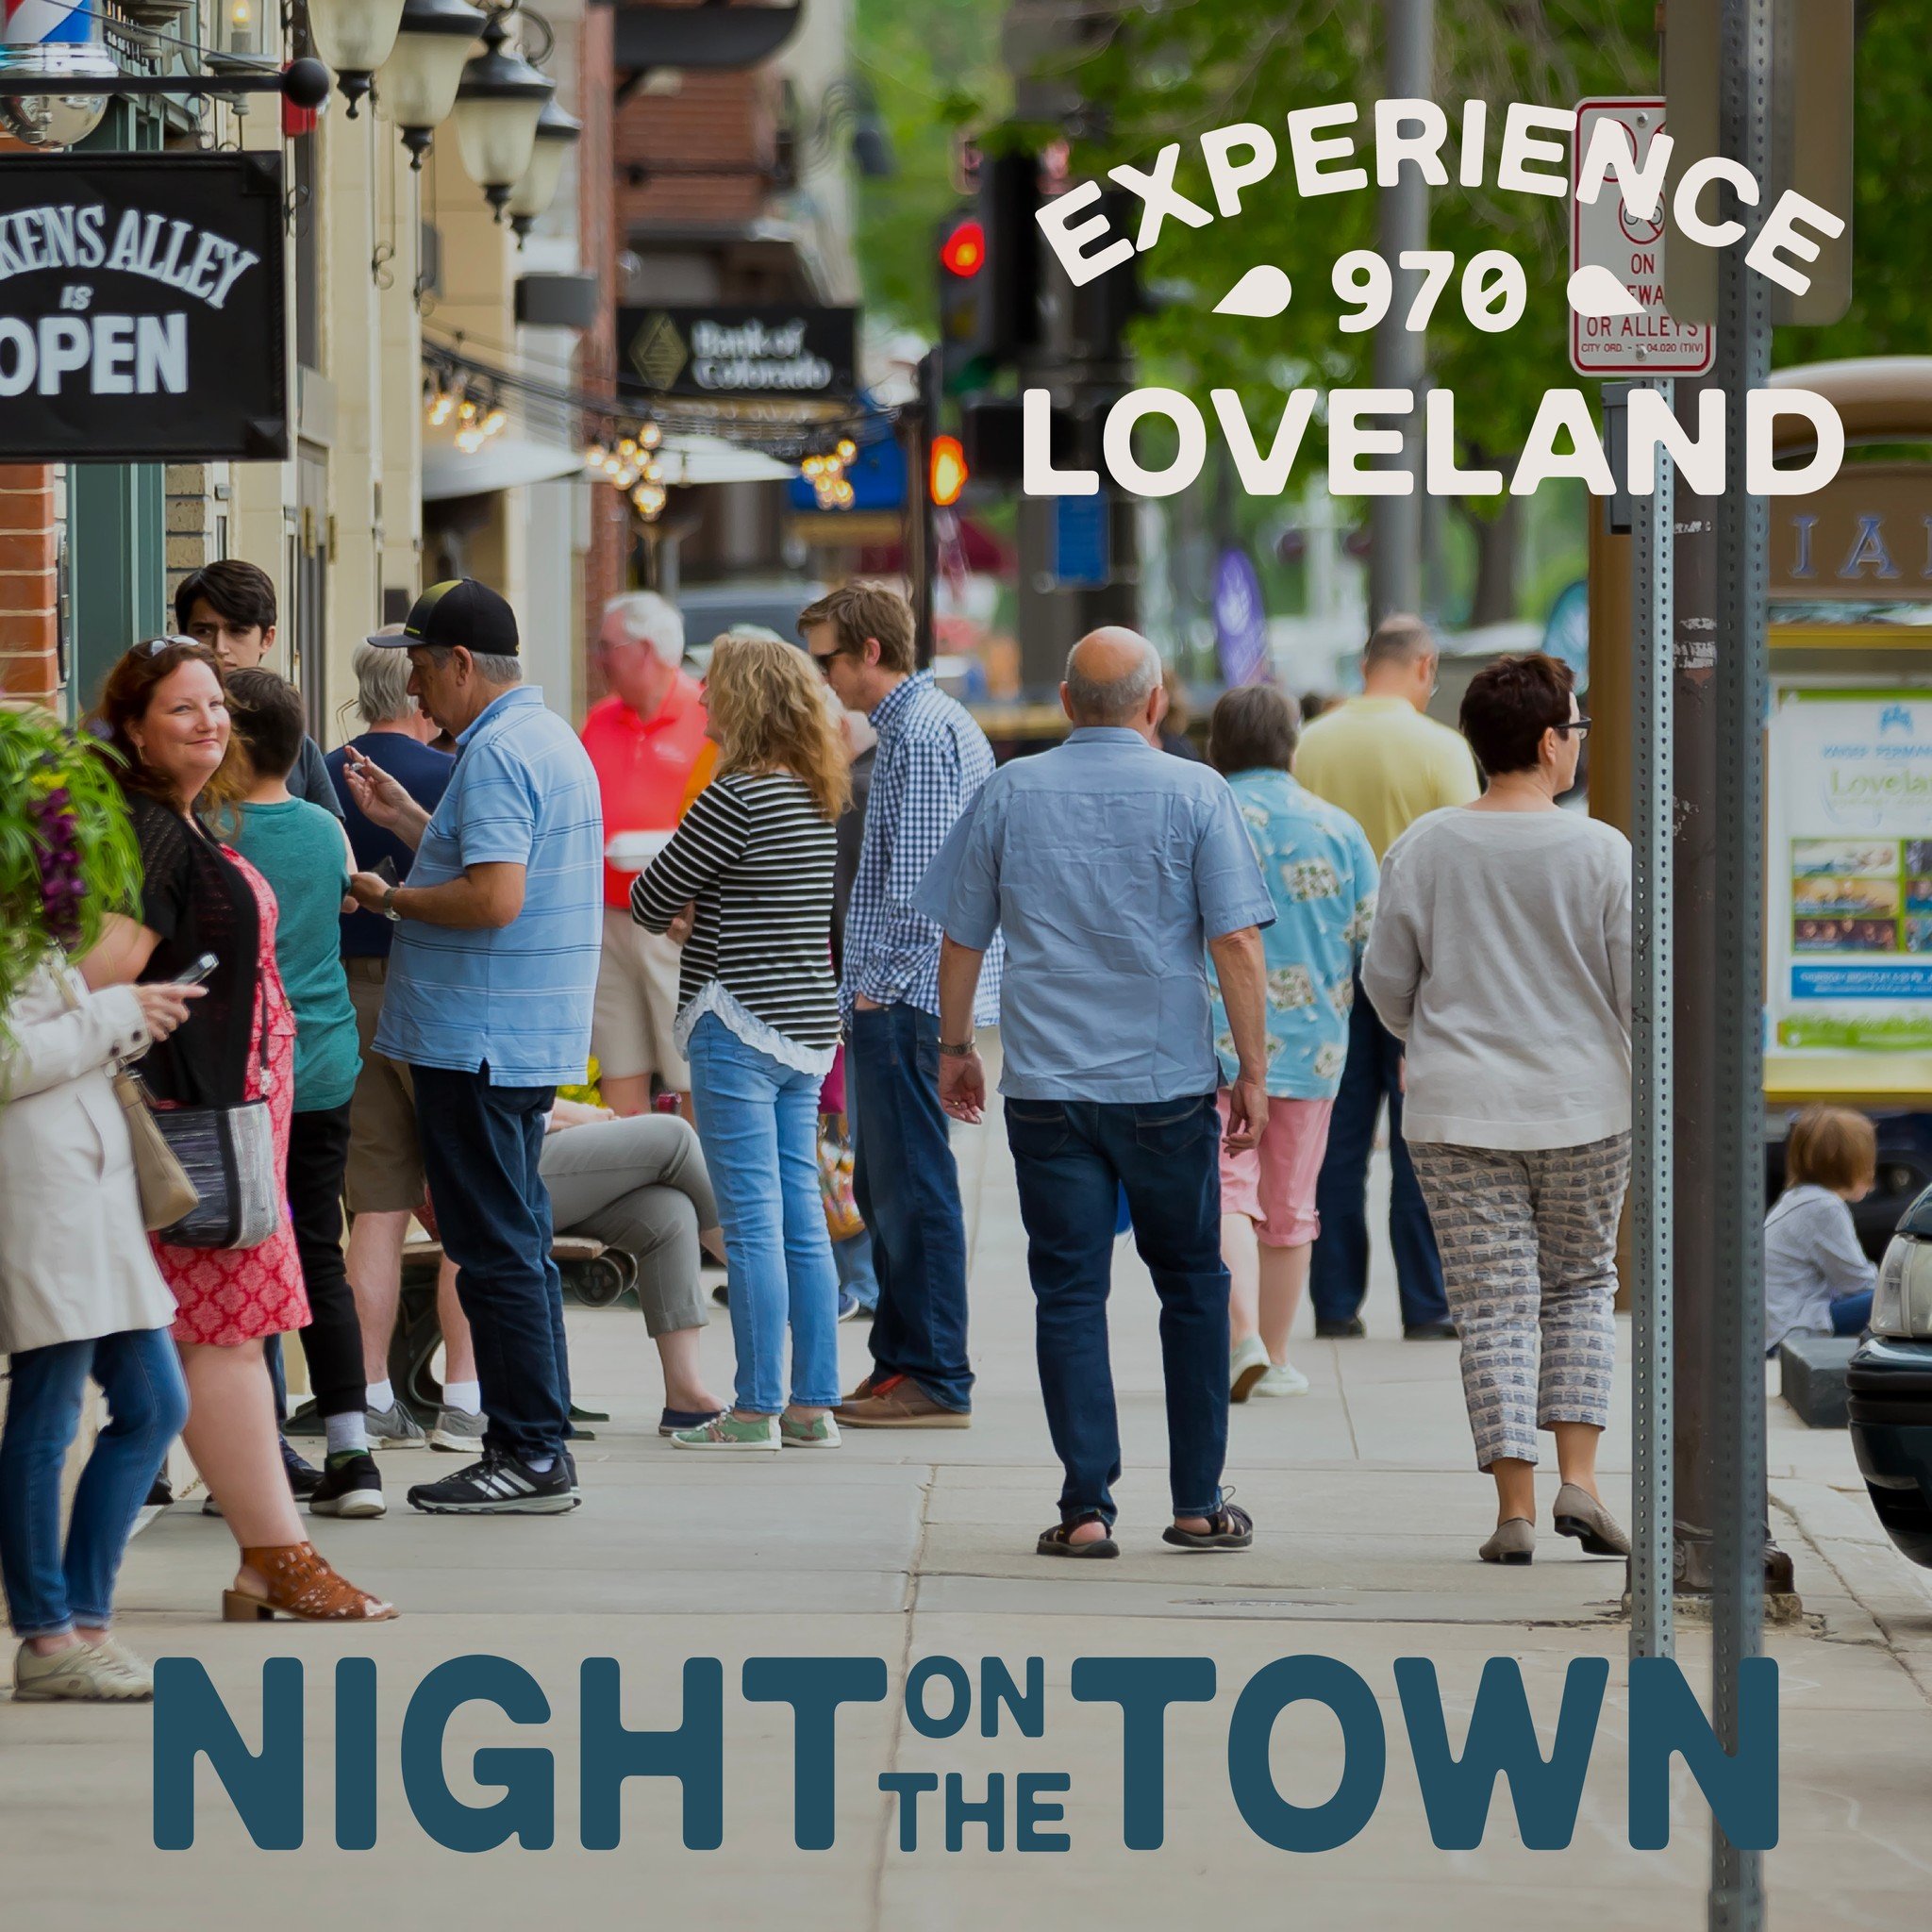 Friday May 10th is Loveland&rsquo;s Night on the Town! Be sure to include Downtown in your plans. Multiple art galleries will be extending their hours and hosting special exhibit openings. See details below! 

Artworks Center for Contemporary Art | @